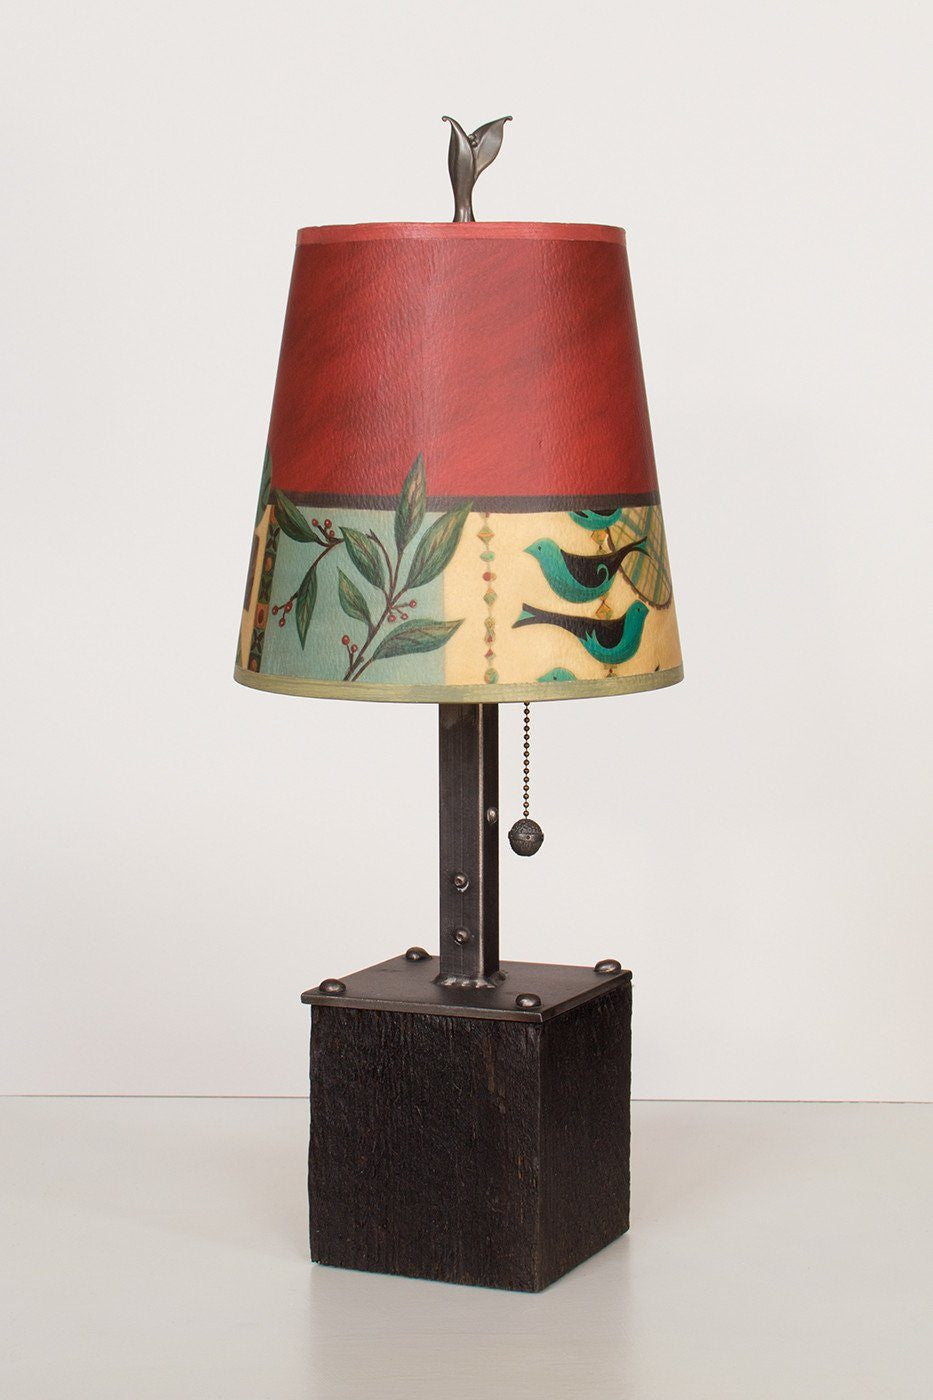 Janna Ugone & Co Table Lamps Steel Table Lamp on Reclaimed Wood with Small Drum Shade in New Capri